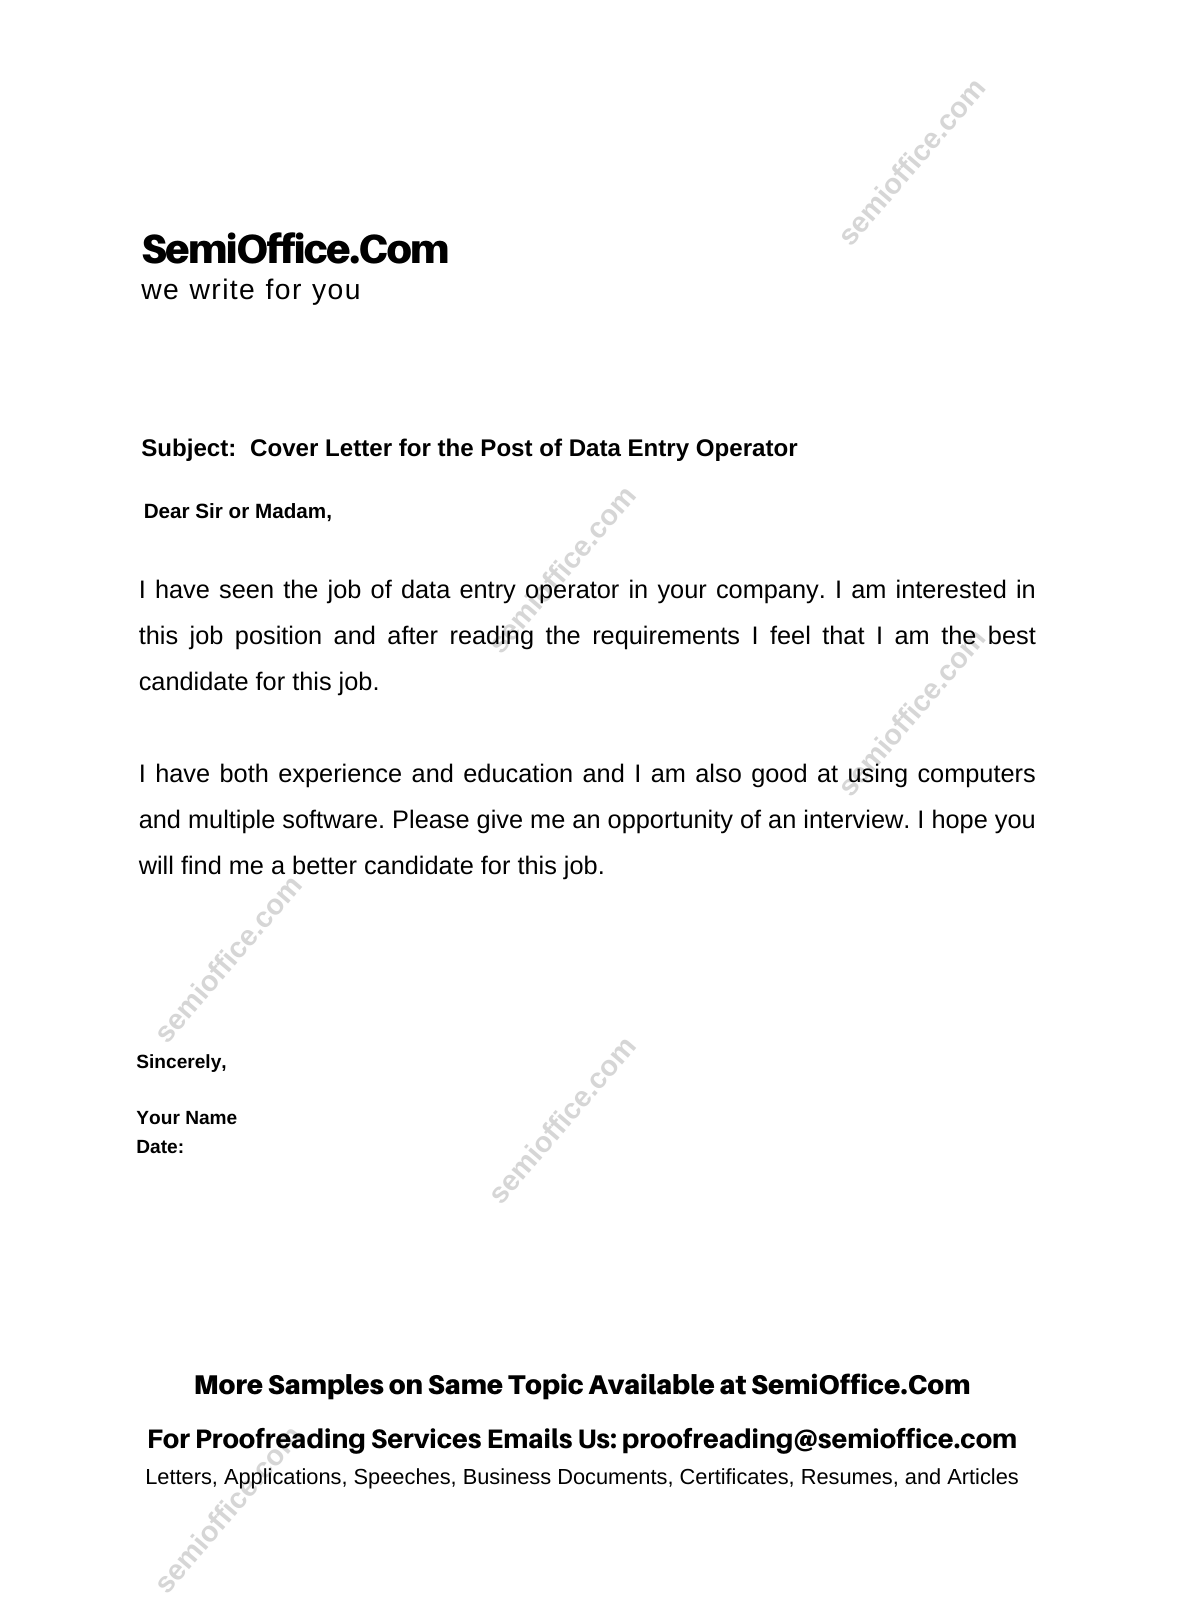 data entry proposal cover letter